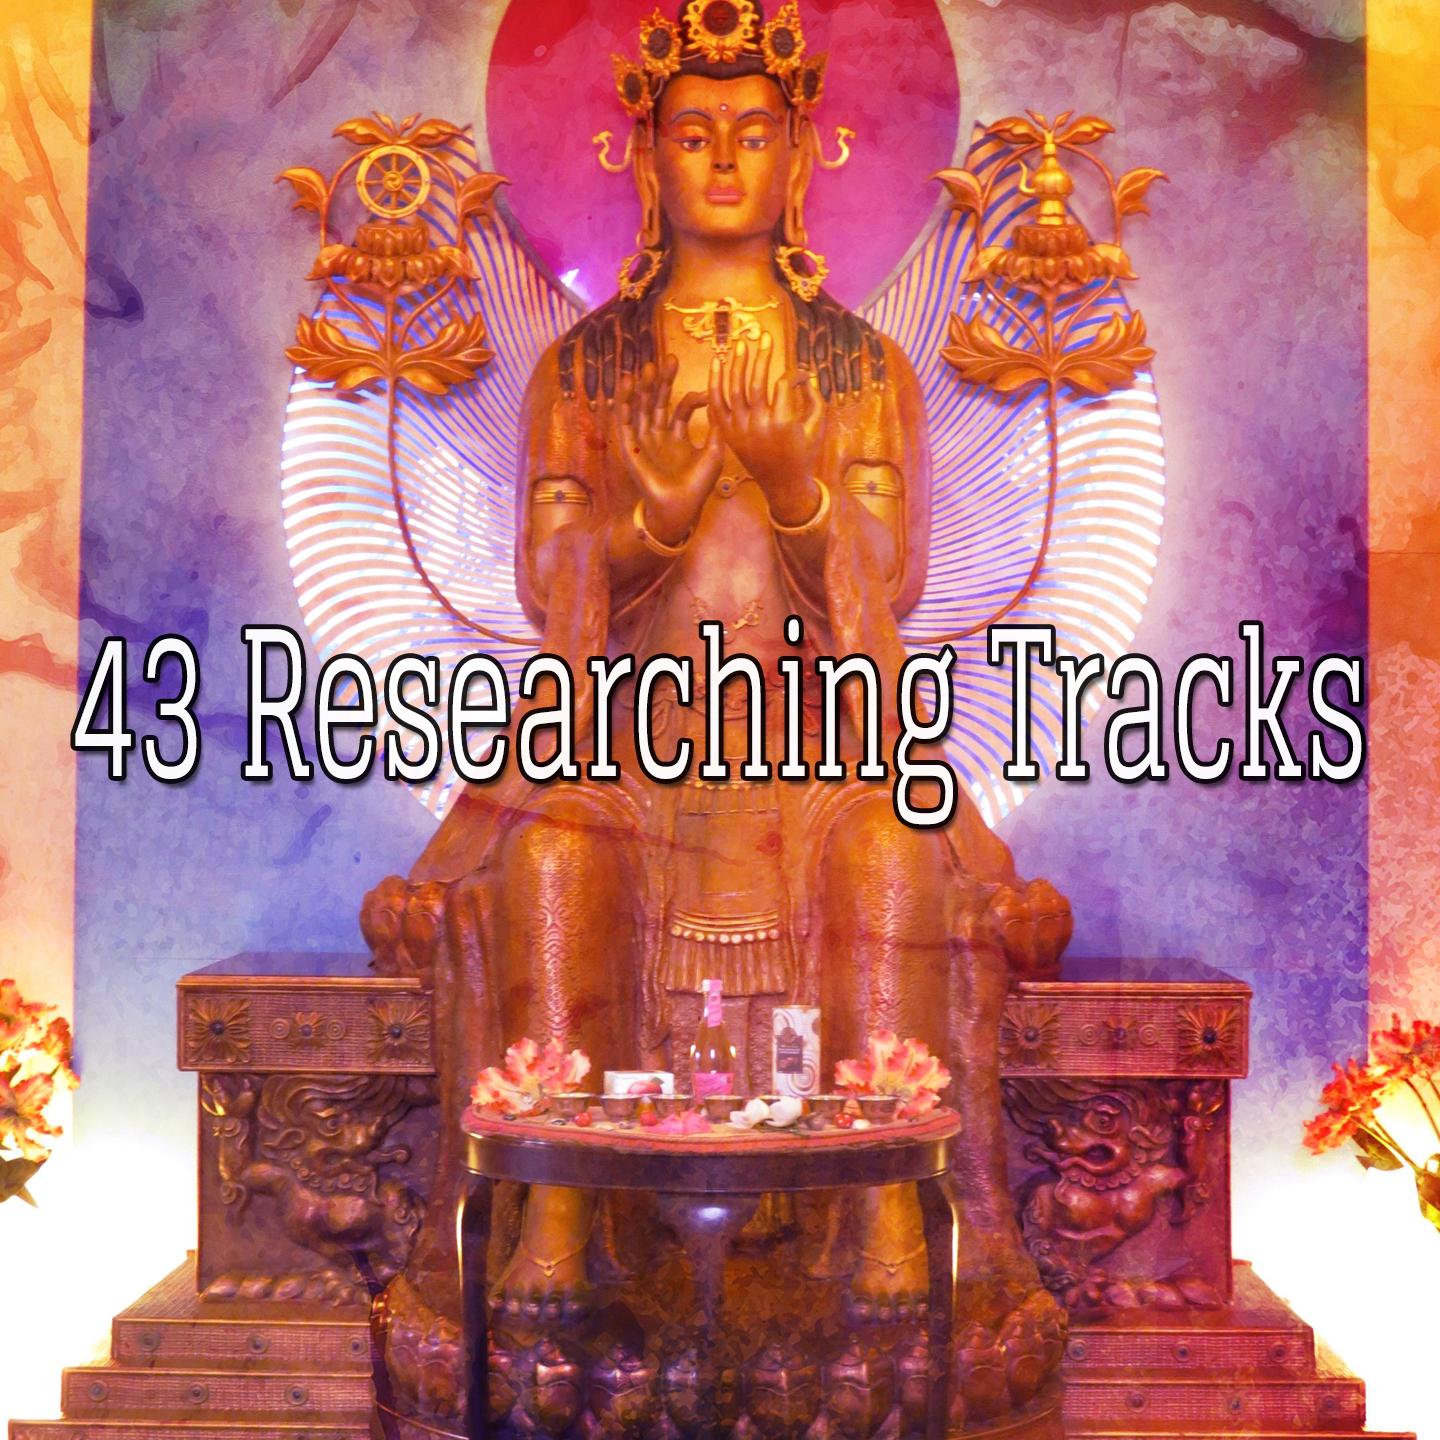 43 Researching Tracks